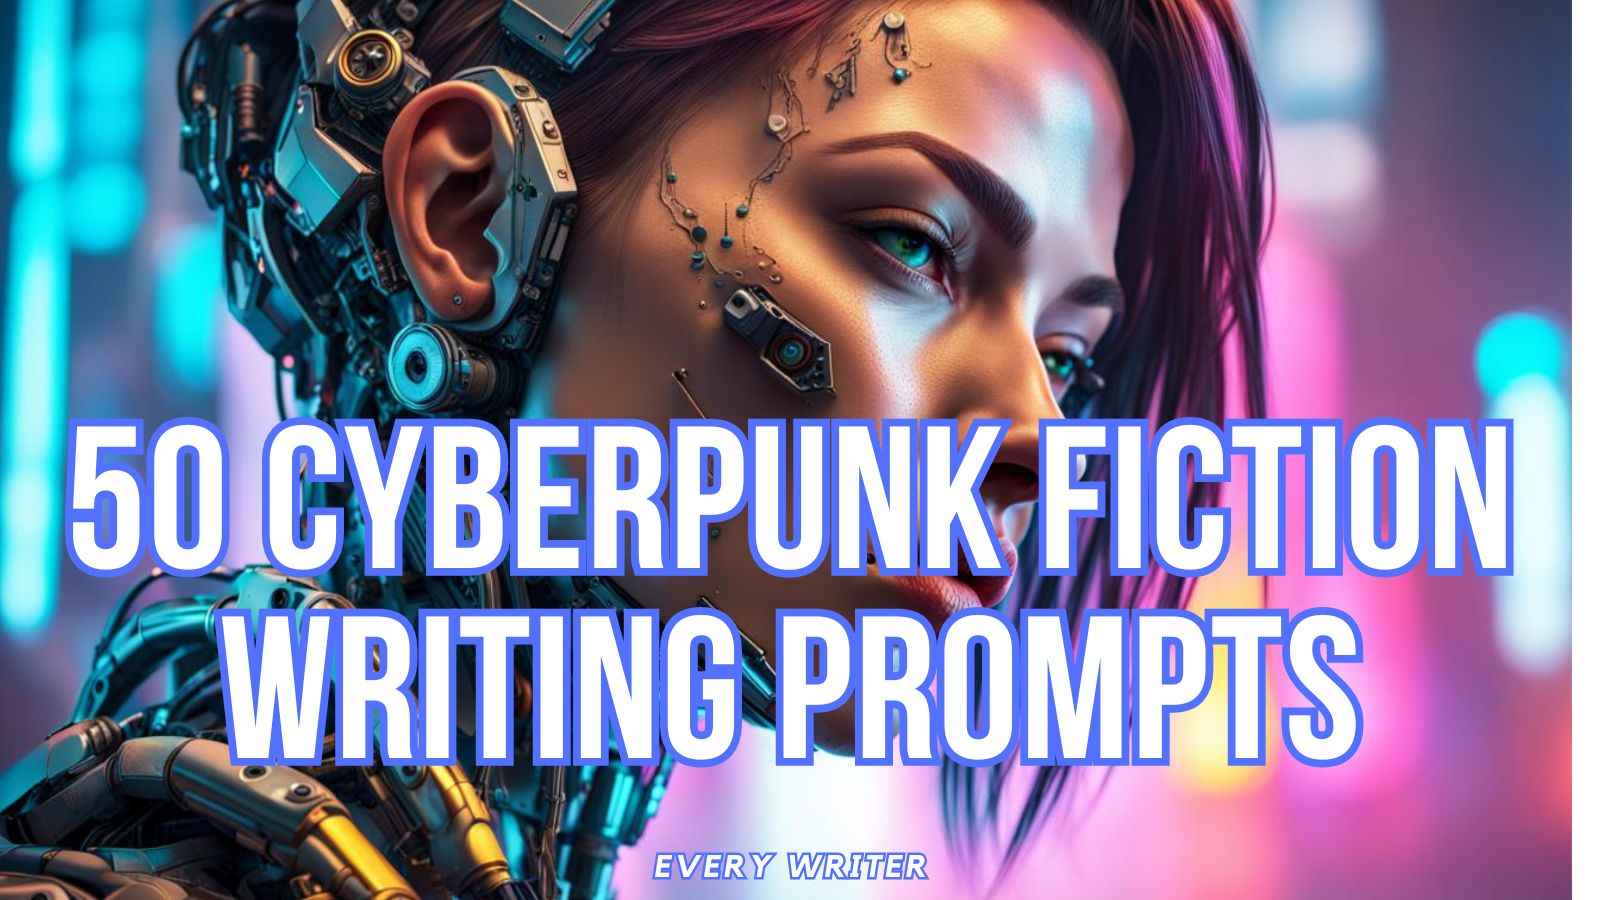 a picture of a cyberpunk girl with cyberpunk writing prompts on it